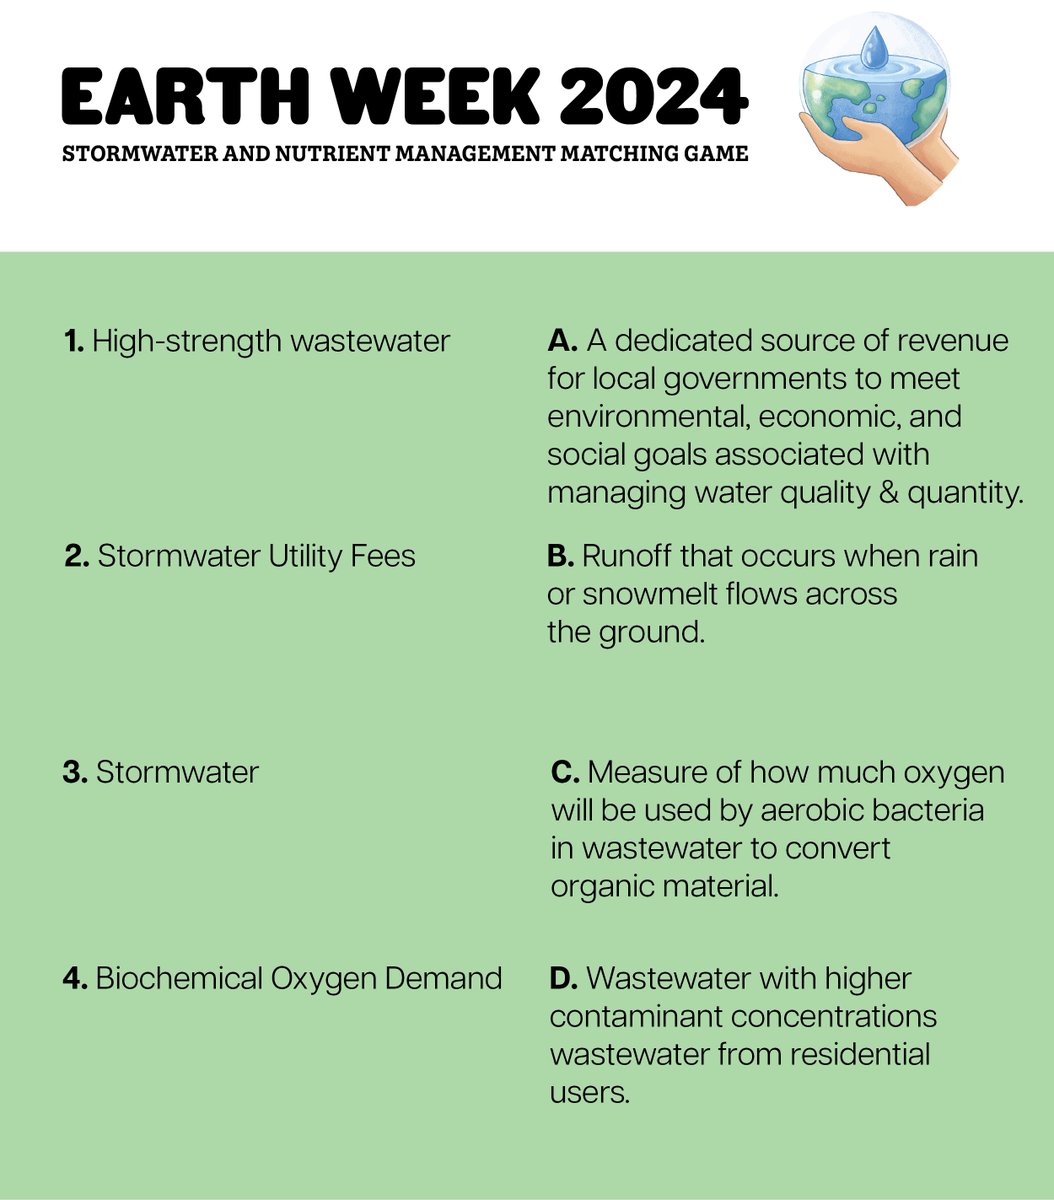 To kick off #EarthWeek, there will be a matching game every day involving water and environmental finance trivia. The answers will be revealed the following day so comment your answers and come back tomorrow to find out!